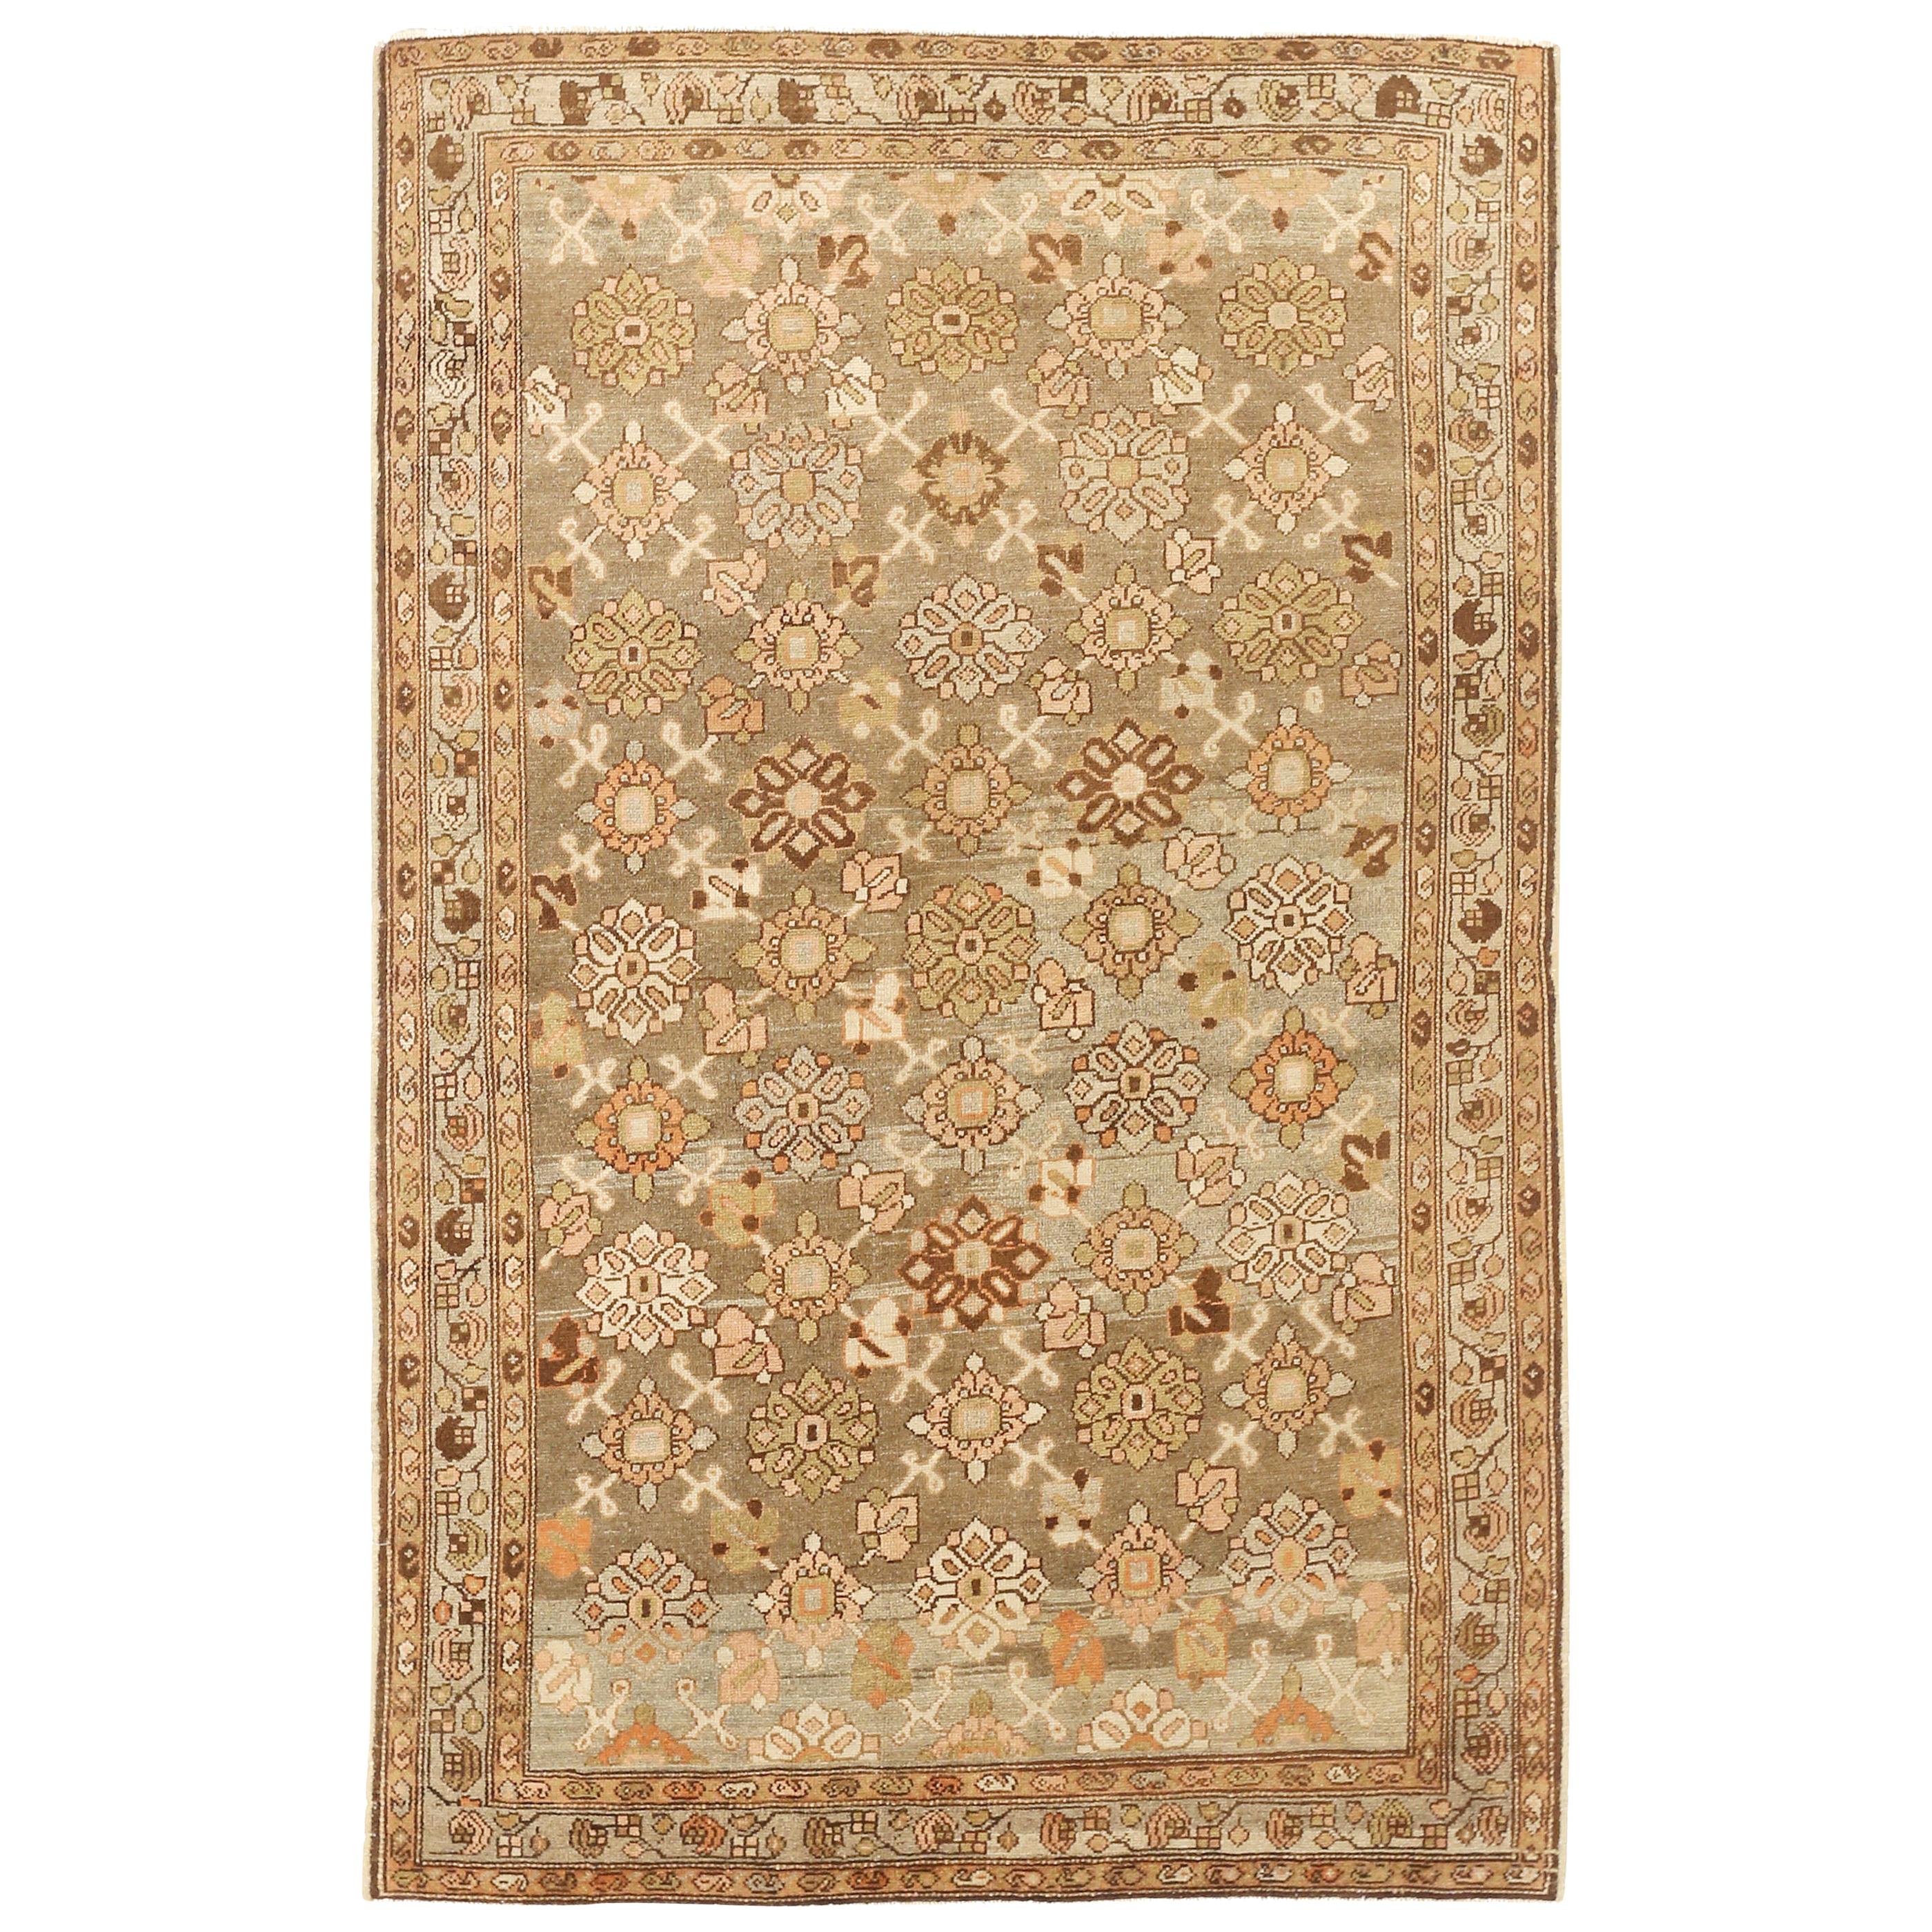 Antique Persian Malayer Rug with Flower Heads All-Over an Ivory Field